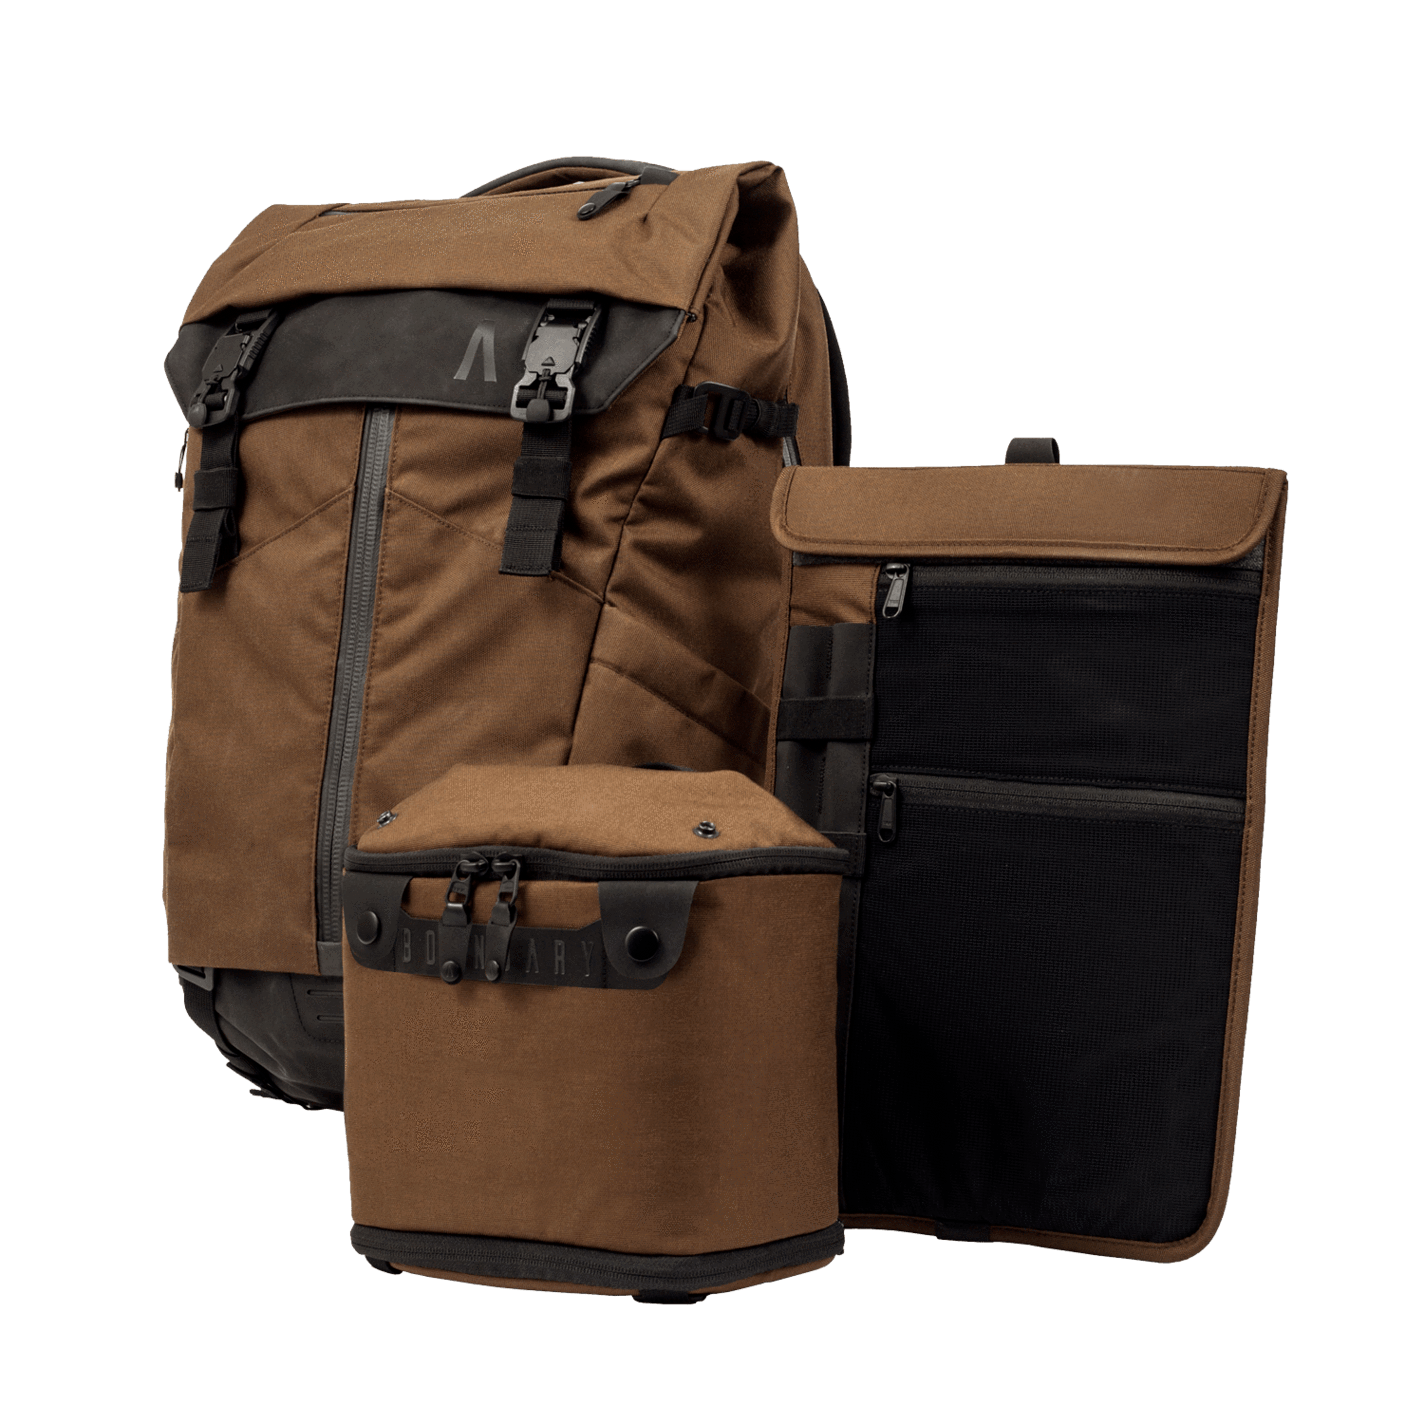 prima system boundary supply backpack review